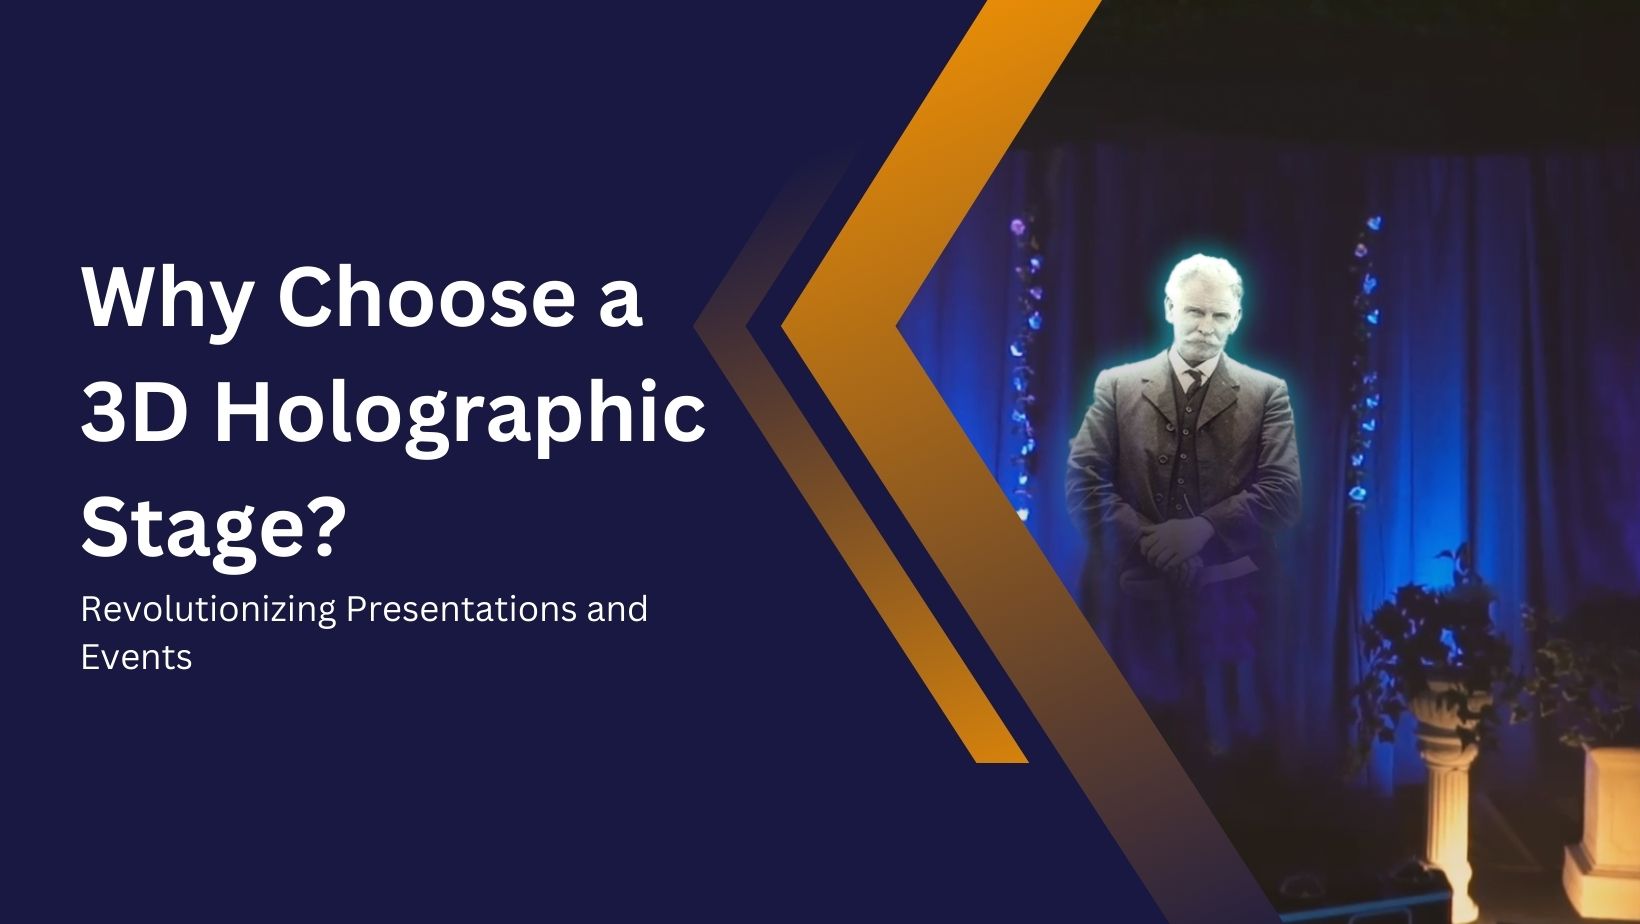 Why Choose a 3D Holographic Stage? Revolutionizing Presentations and Events